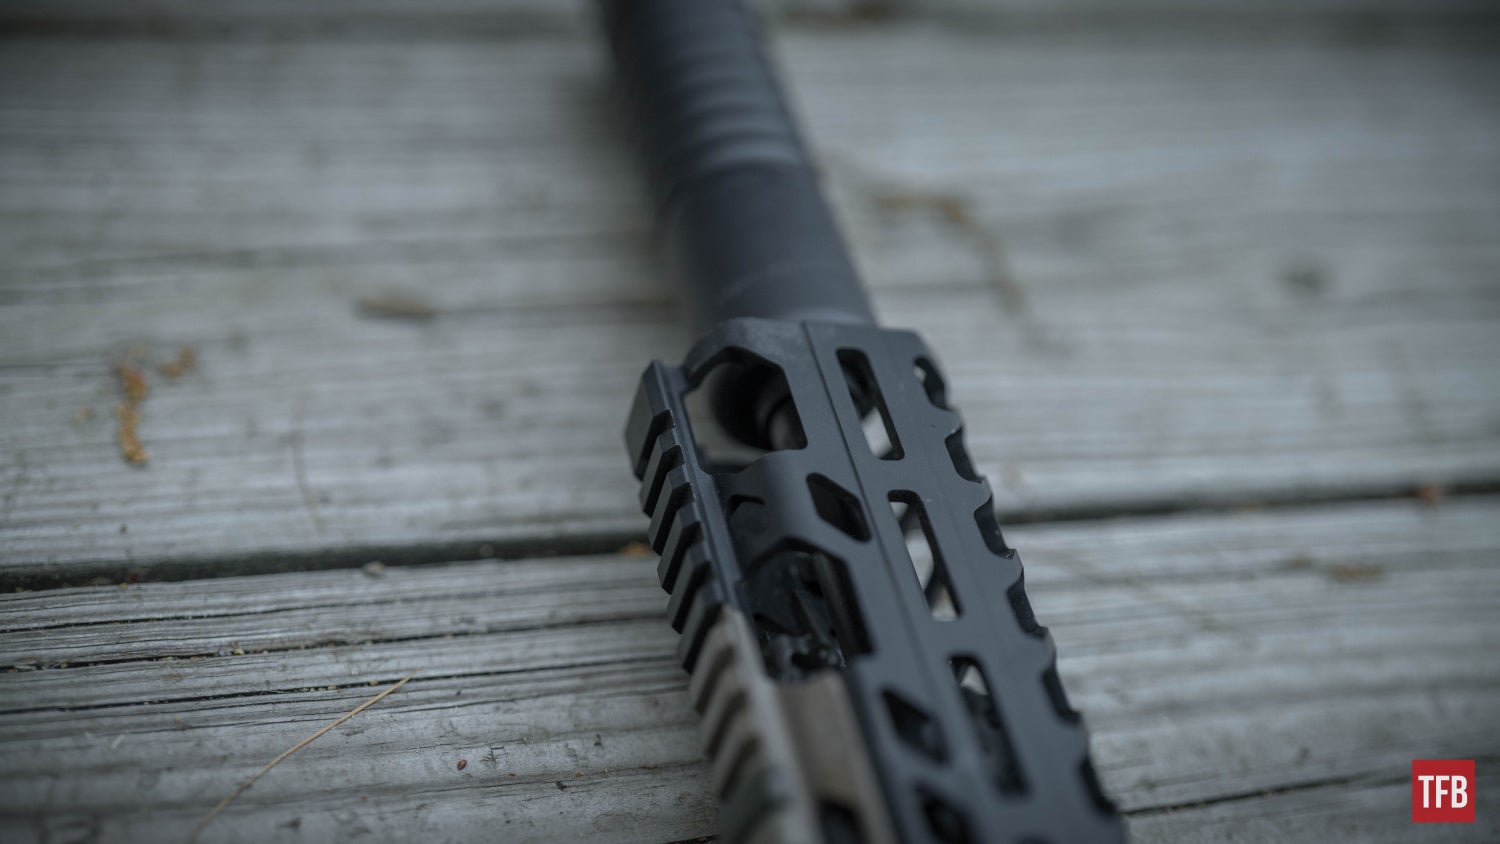 SILENCER SATURDAY #229: - AB Suppressor Raptor 762 - Subs and Supers